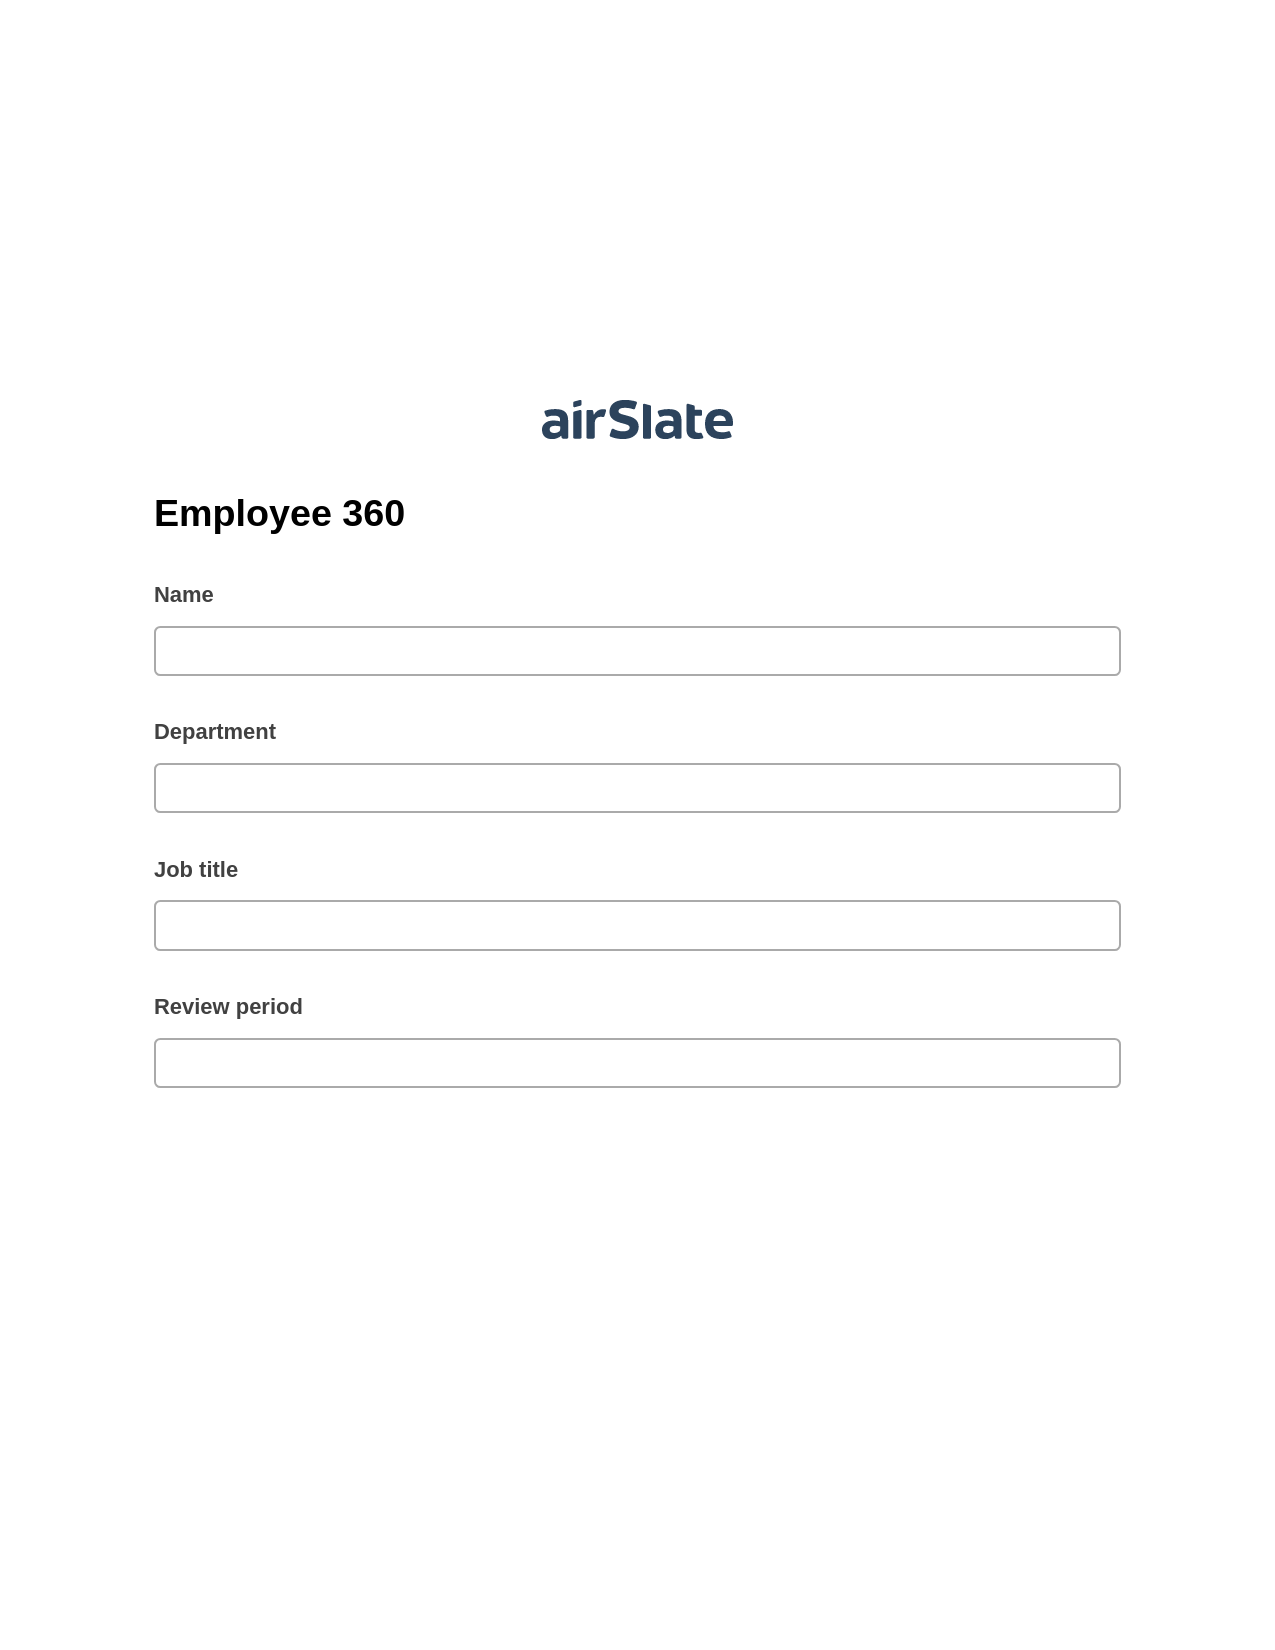 Employee 360 Pre-fill from another Slate Bot, Update MS Dynamics 365 Record Bot, Archive to Box Bot